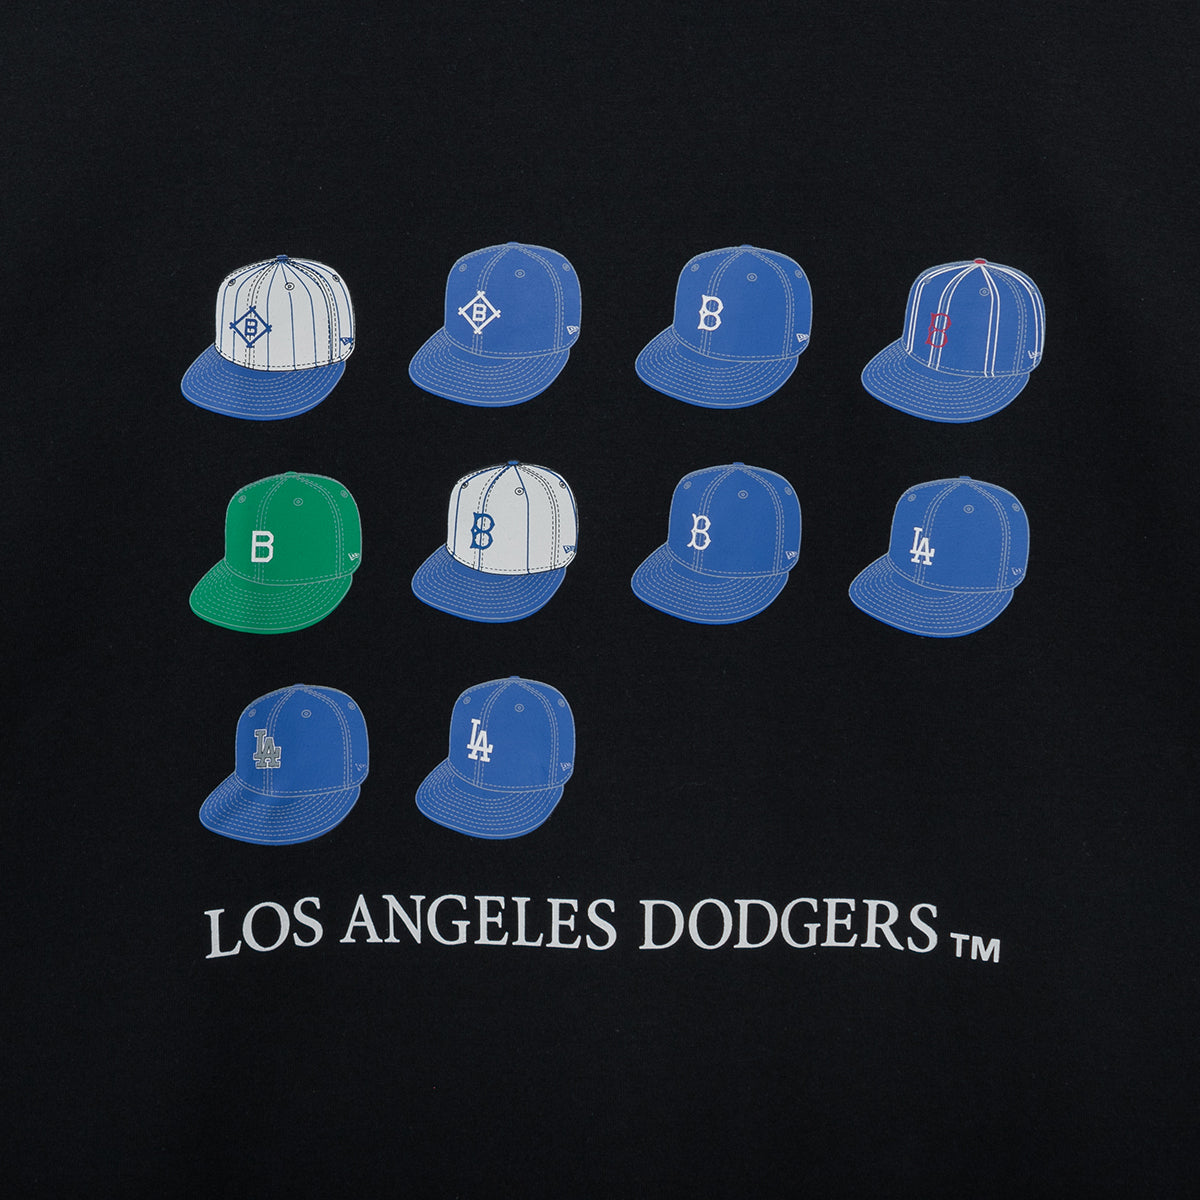 LOS ANGELES DODGERS MLB COOPERSTOWN HISTORY CAPS BLACK SHORT SLEEVE T-SHIRT